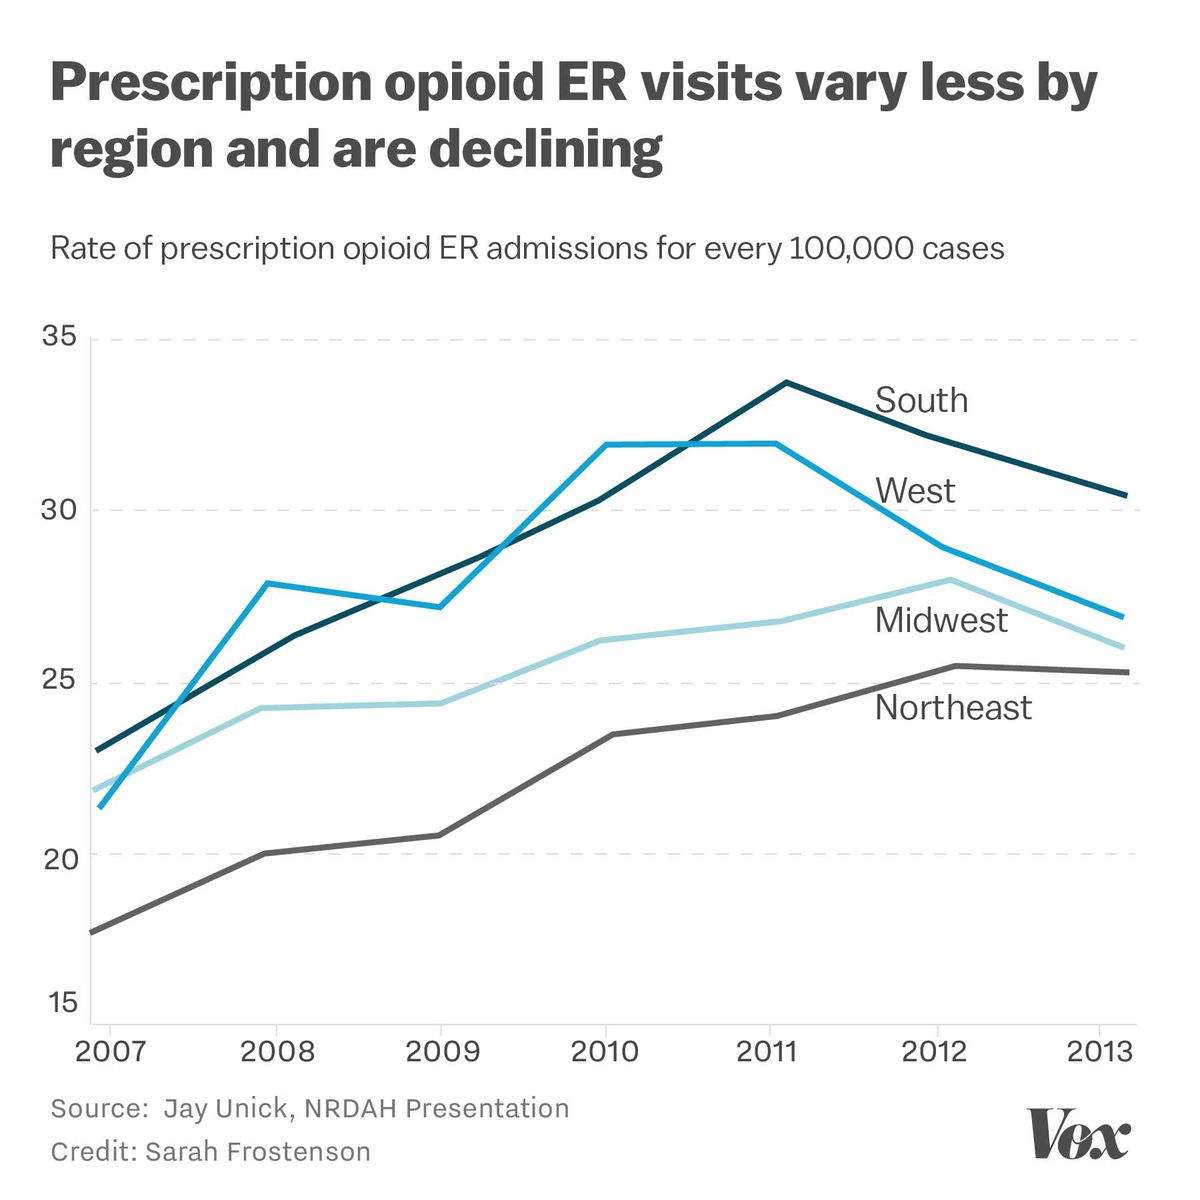 Chart showing that prescription opioid ER visits are in decline